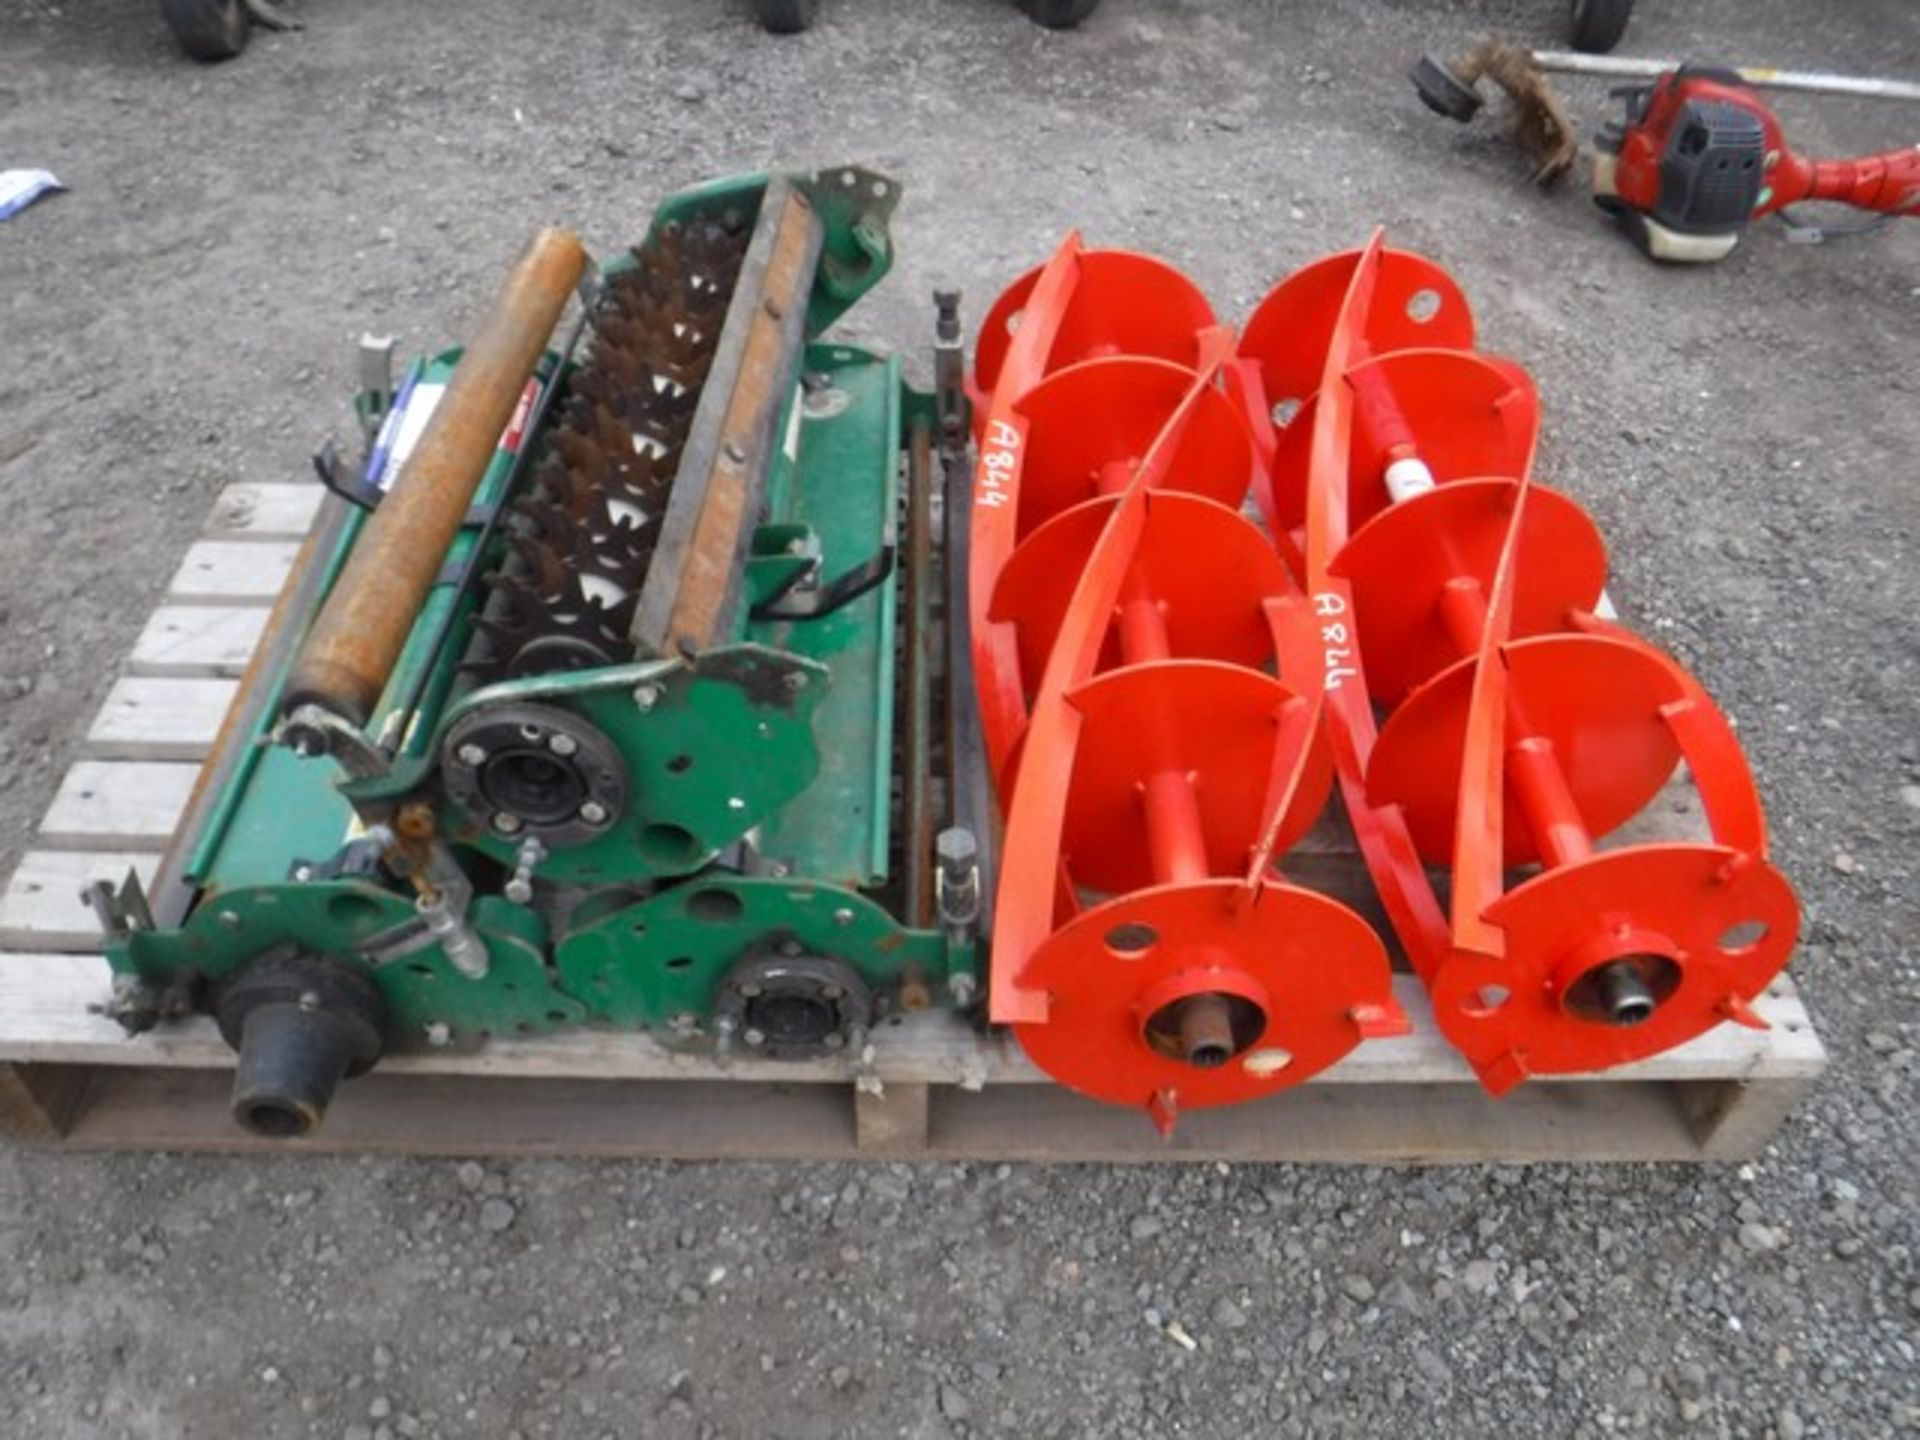 RANSOMES TEXTROW scarifiers & 2 new cylinder/ blades for Ransomes 2250. - Image 4 of 4